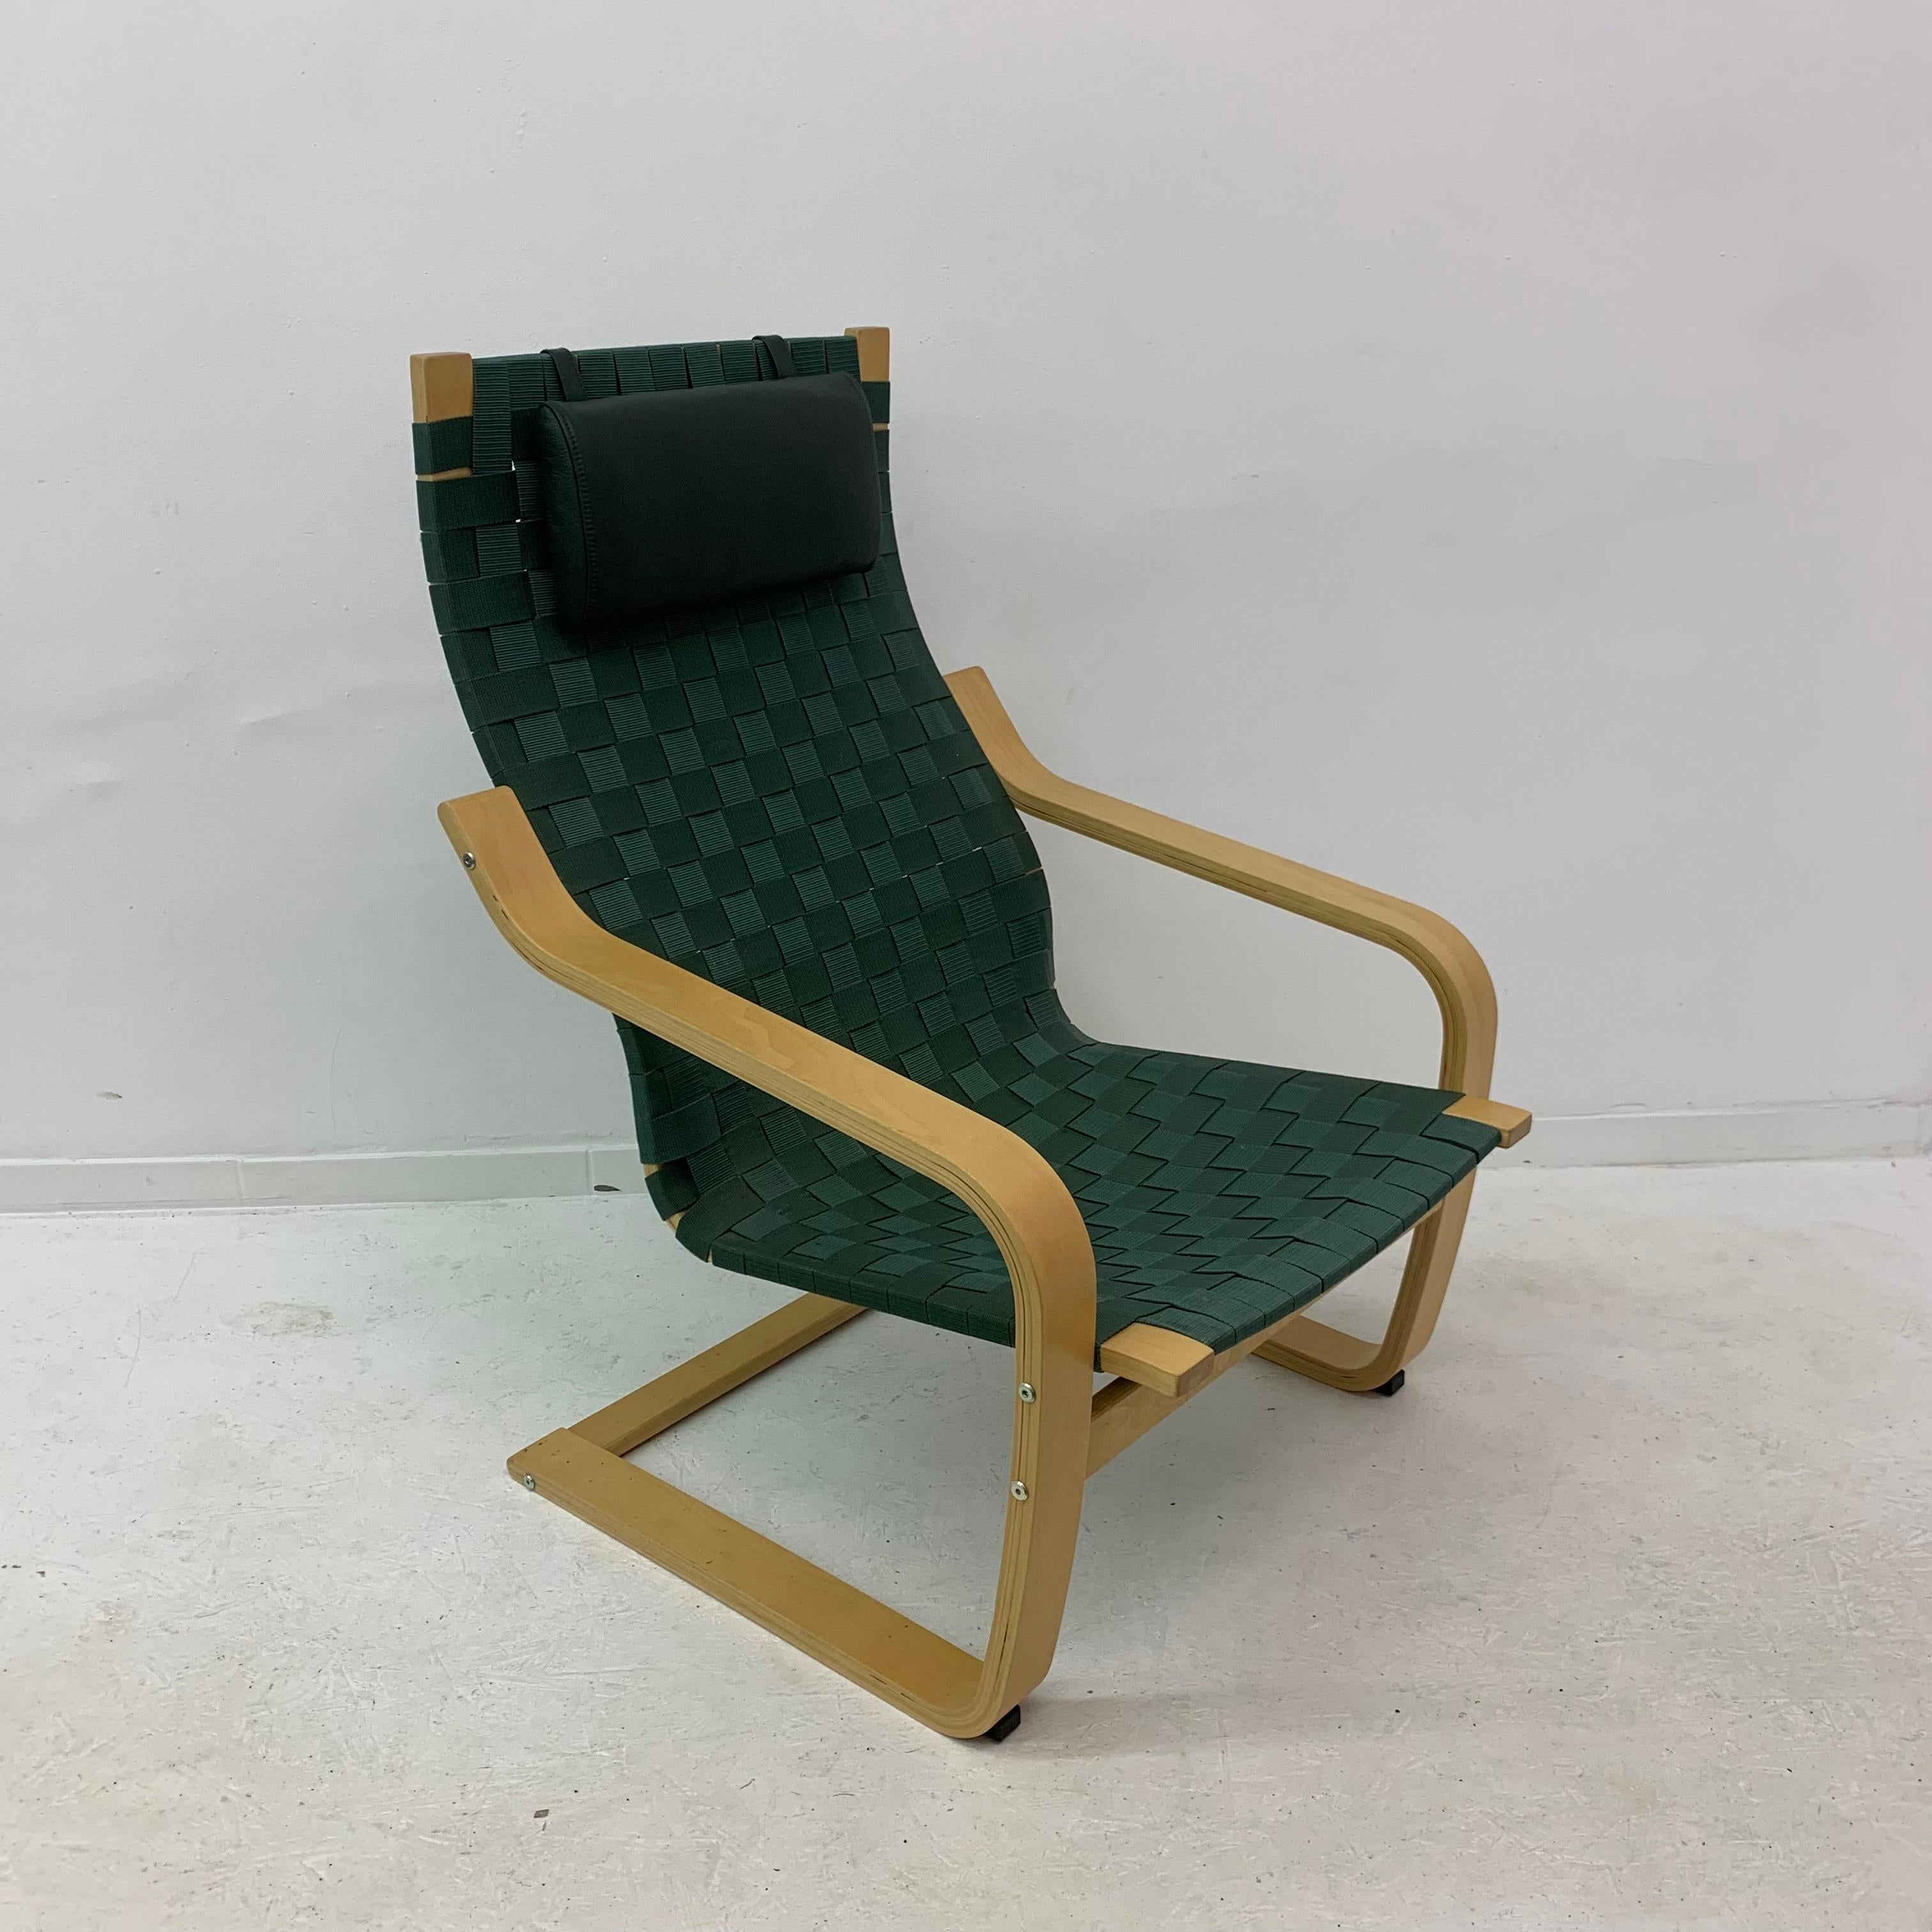 Limited Edition Aalto Tribute Points Chair by Noboru Nakamura for Ikea, 1999 For Sale 1